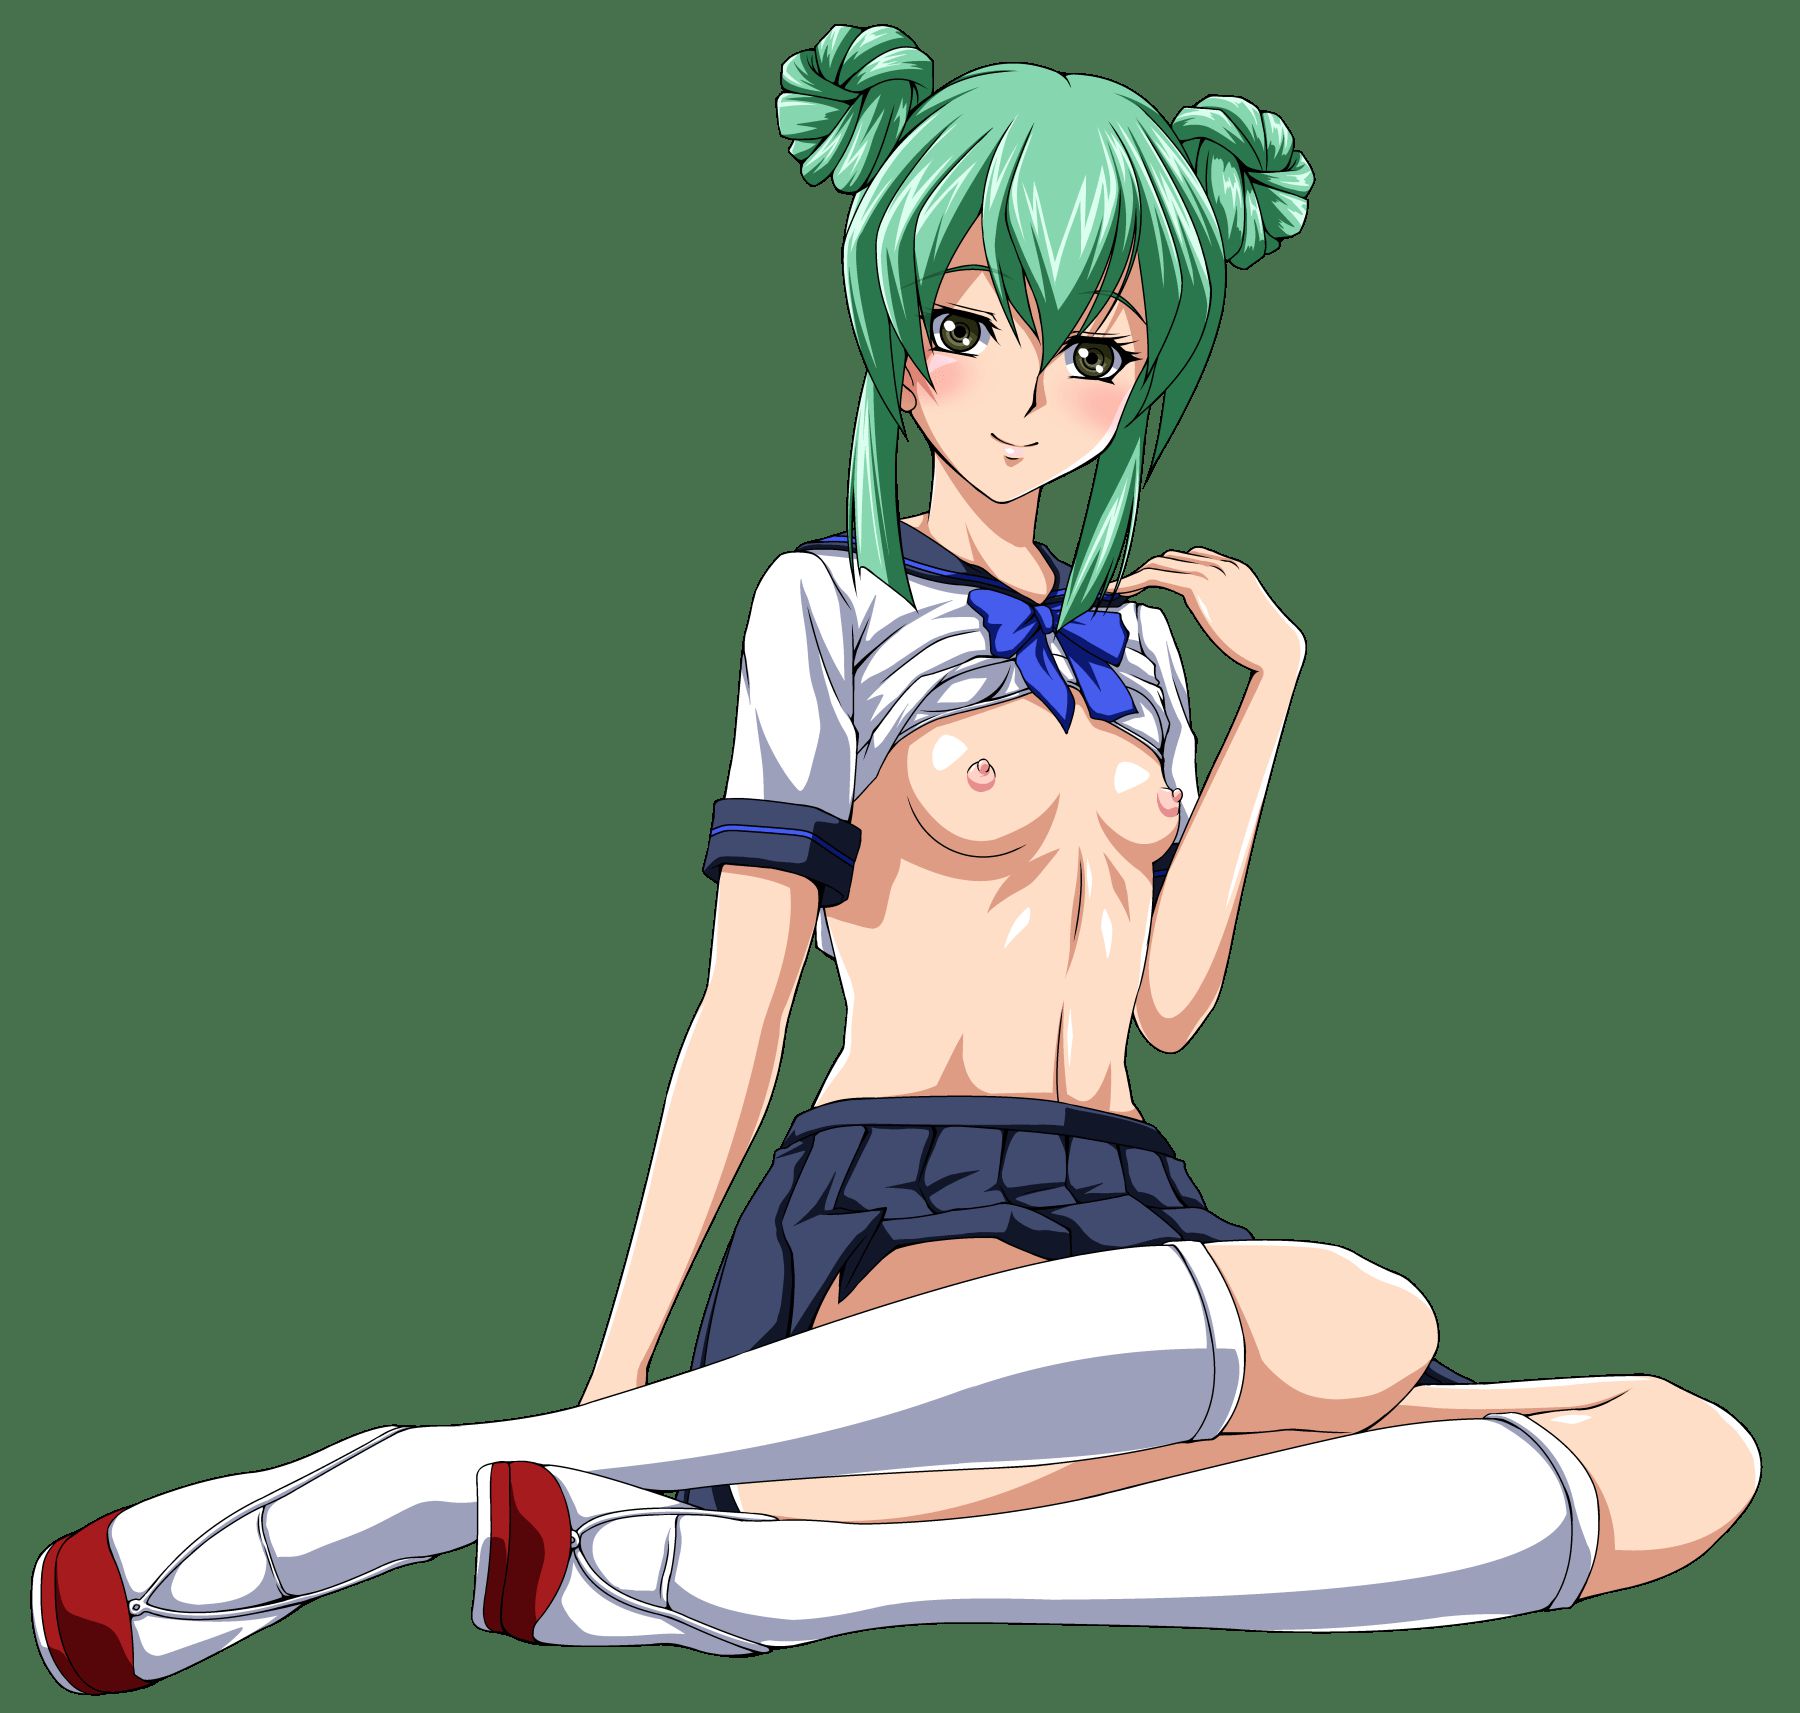 【Erocora Character Material】PNG background transparent erotic image such as anime characters Part 396 53